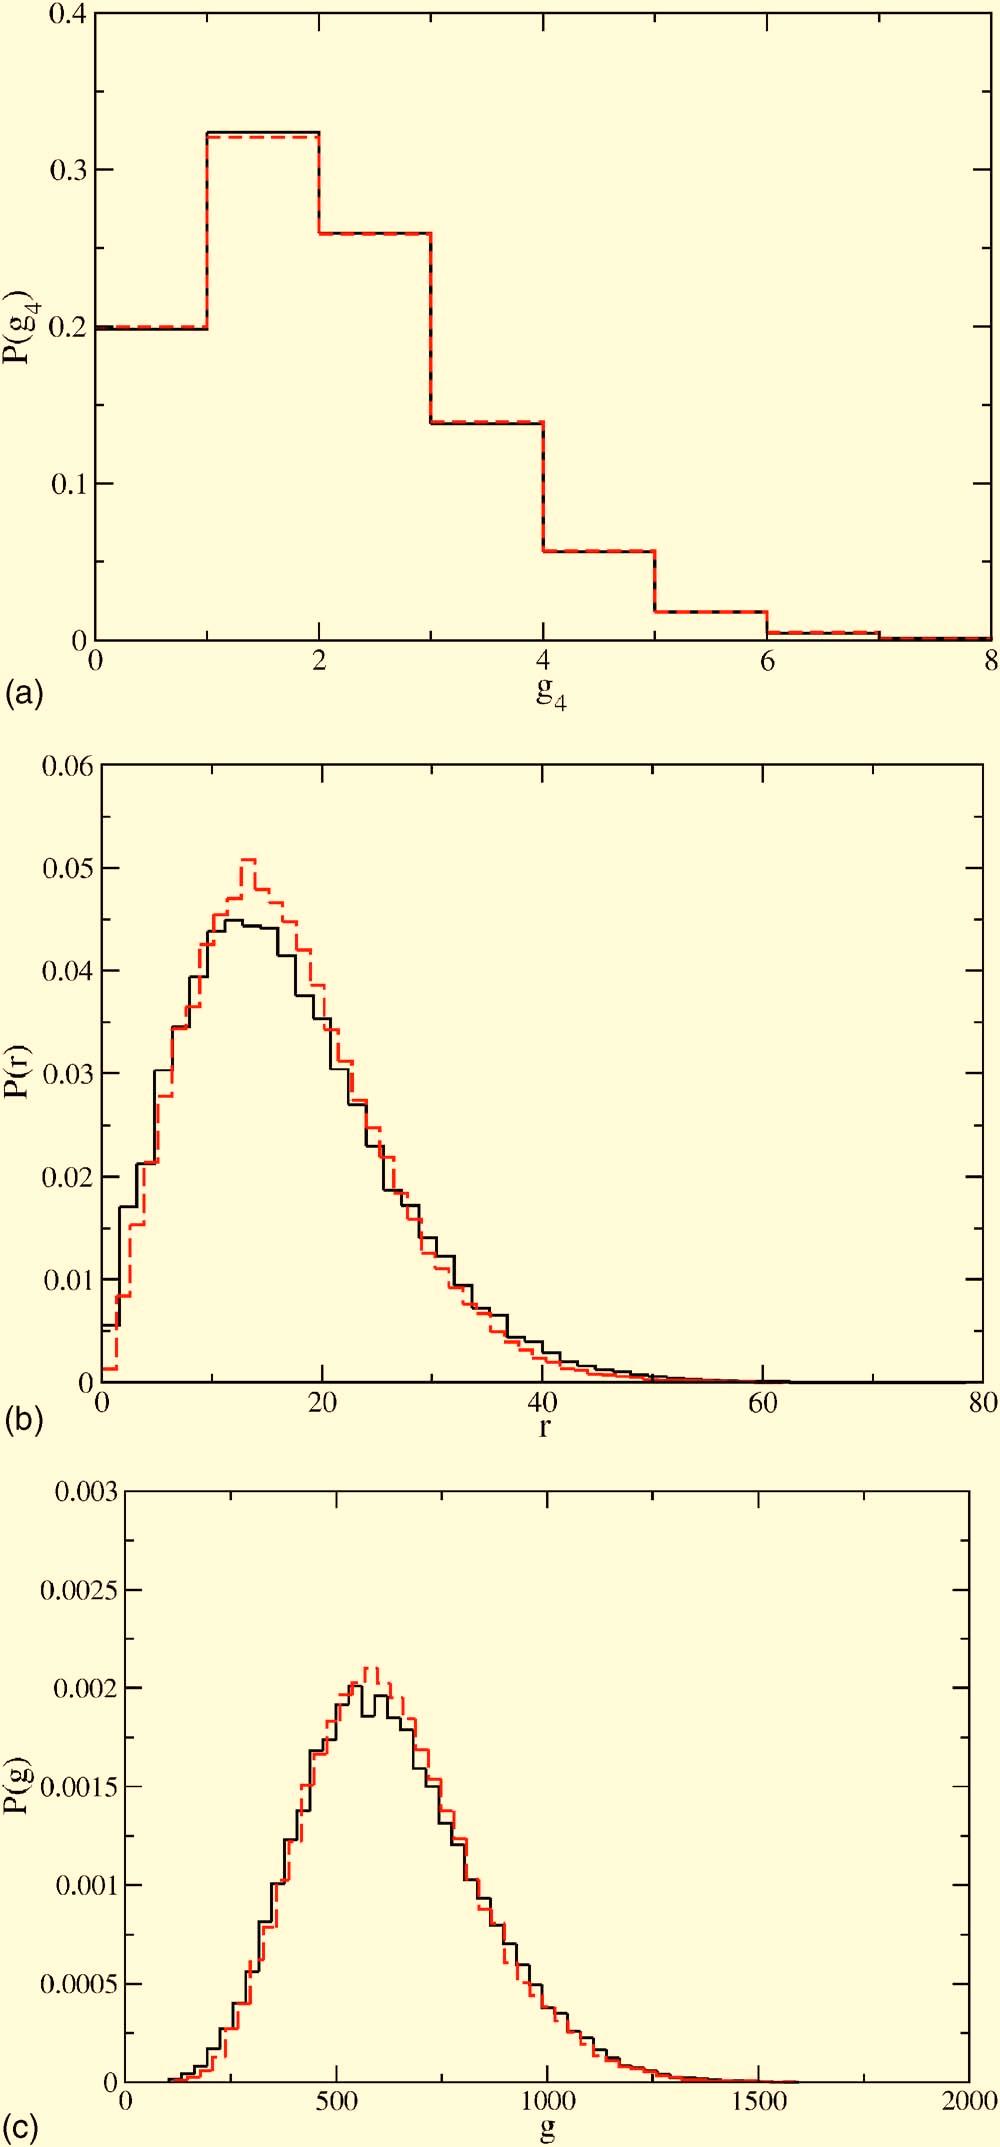 026103-10 Tsimring, Volfson, and Hasty Chaos 16, 026103 2006 FIG. 4. Probability distributions of the number of molecules of GAL4 a, mrna b, and GAL1 c for gal 0.